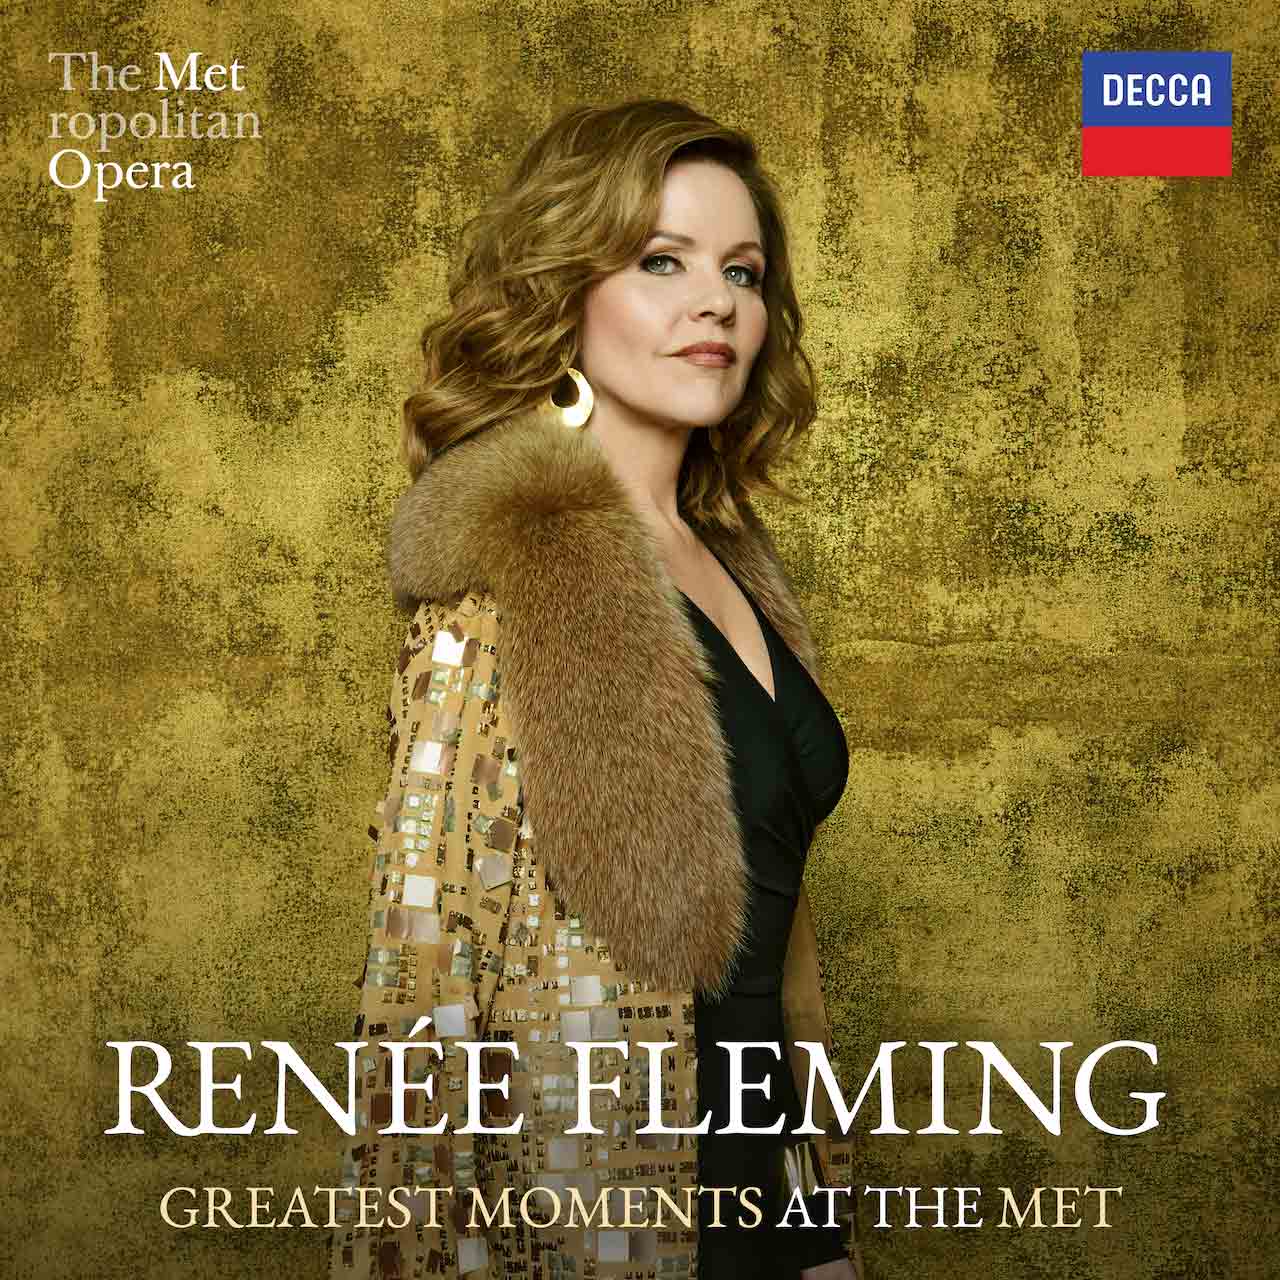 Decca Classics To Release Renée Fleming Greatest Moments at the Met